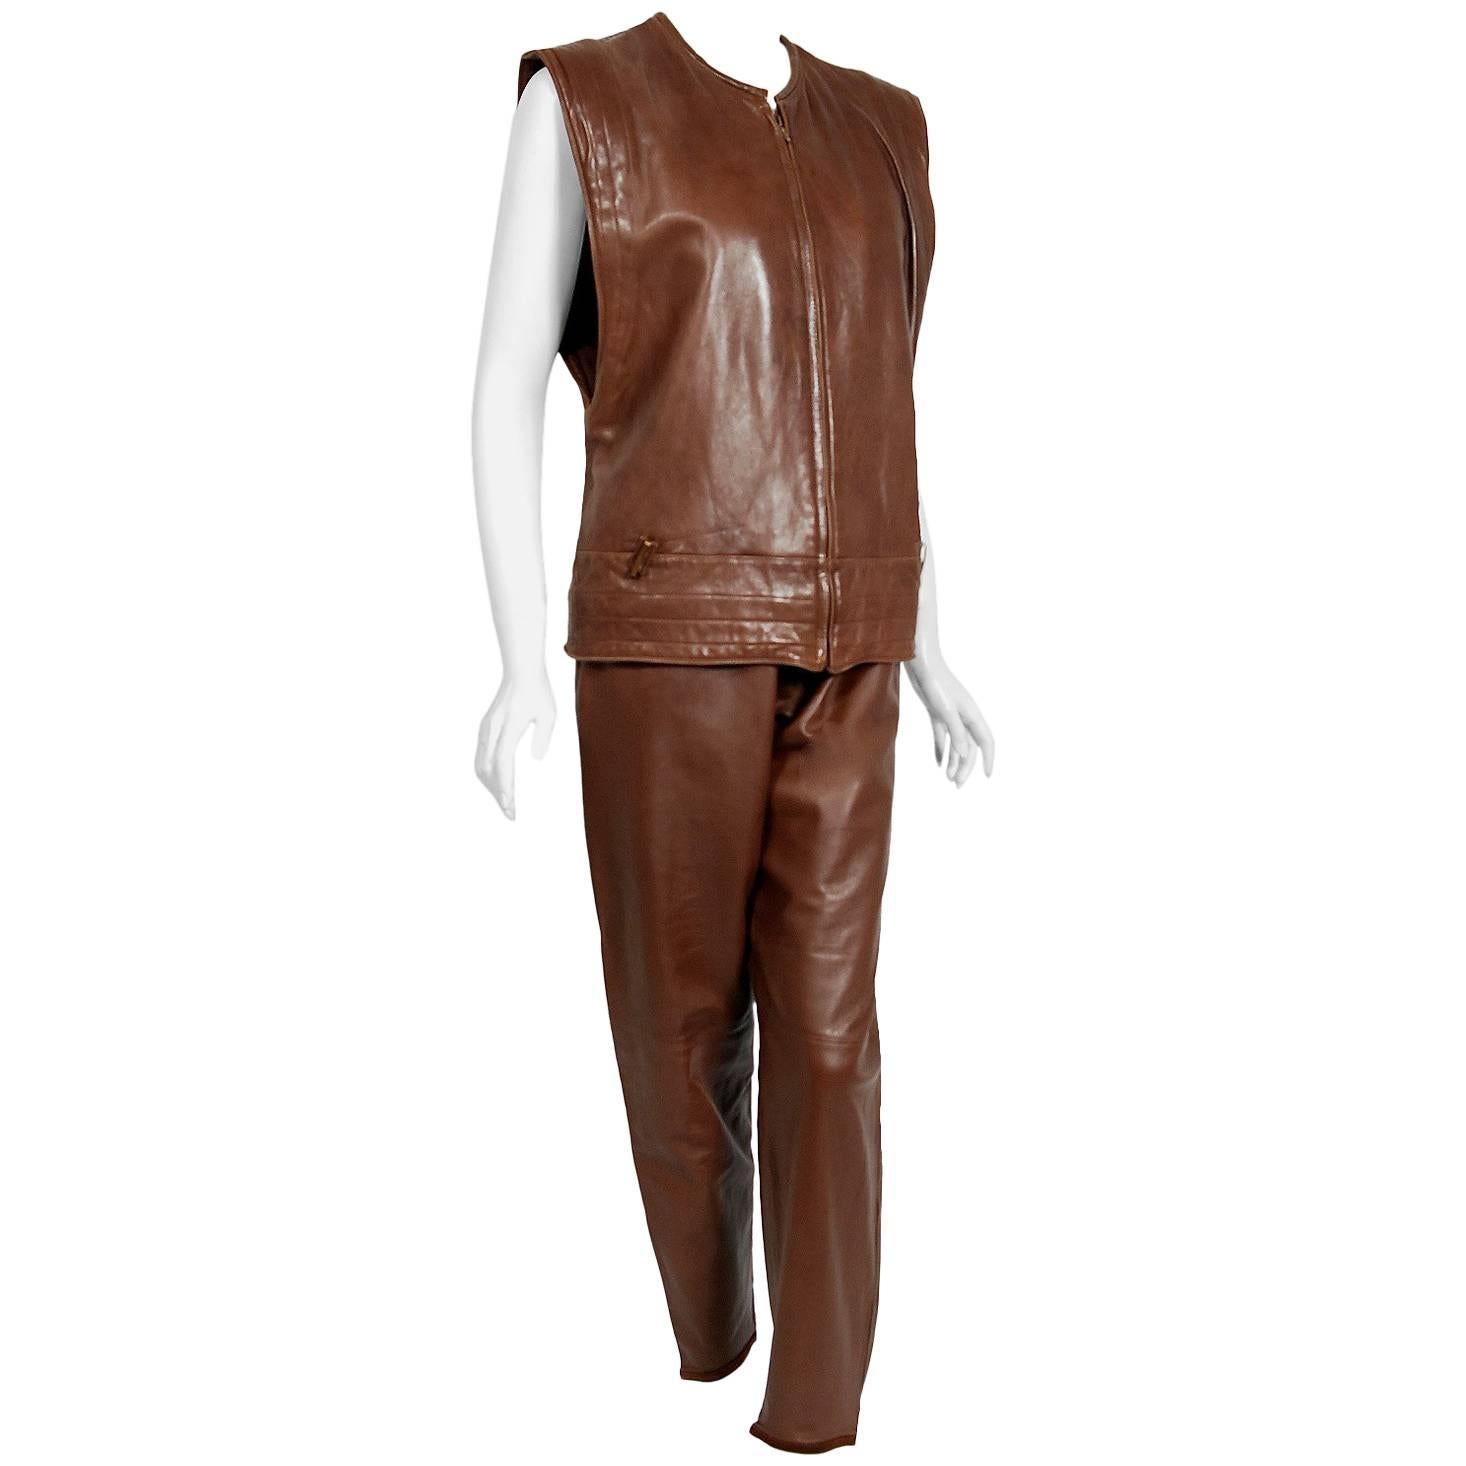 1984 Gianni Versace Couture Studded Brown Leather Vest and High Waist Pants